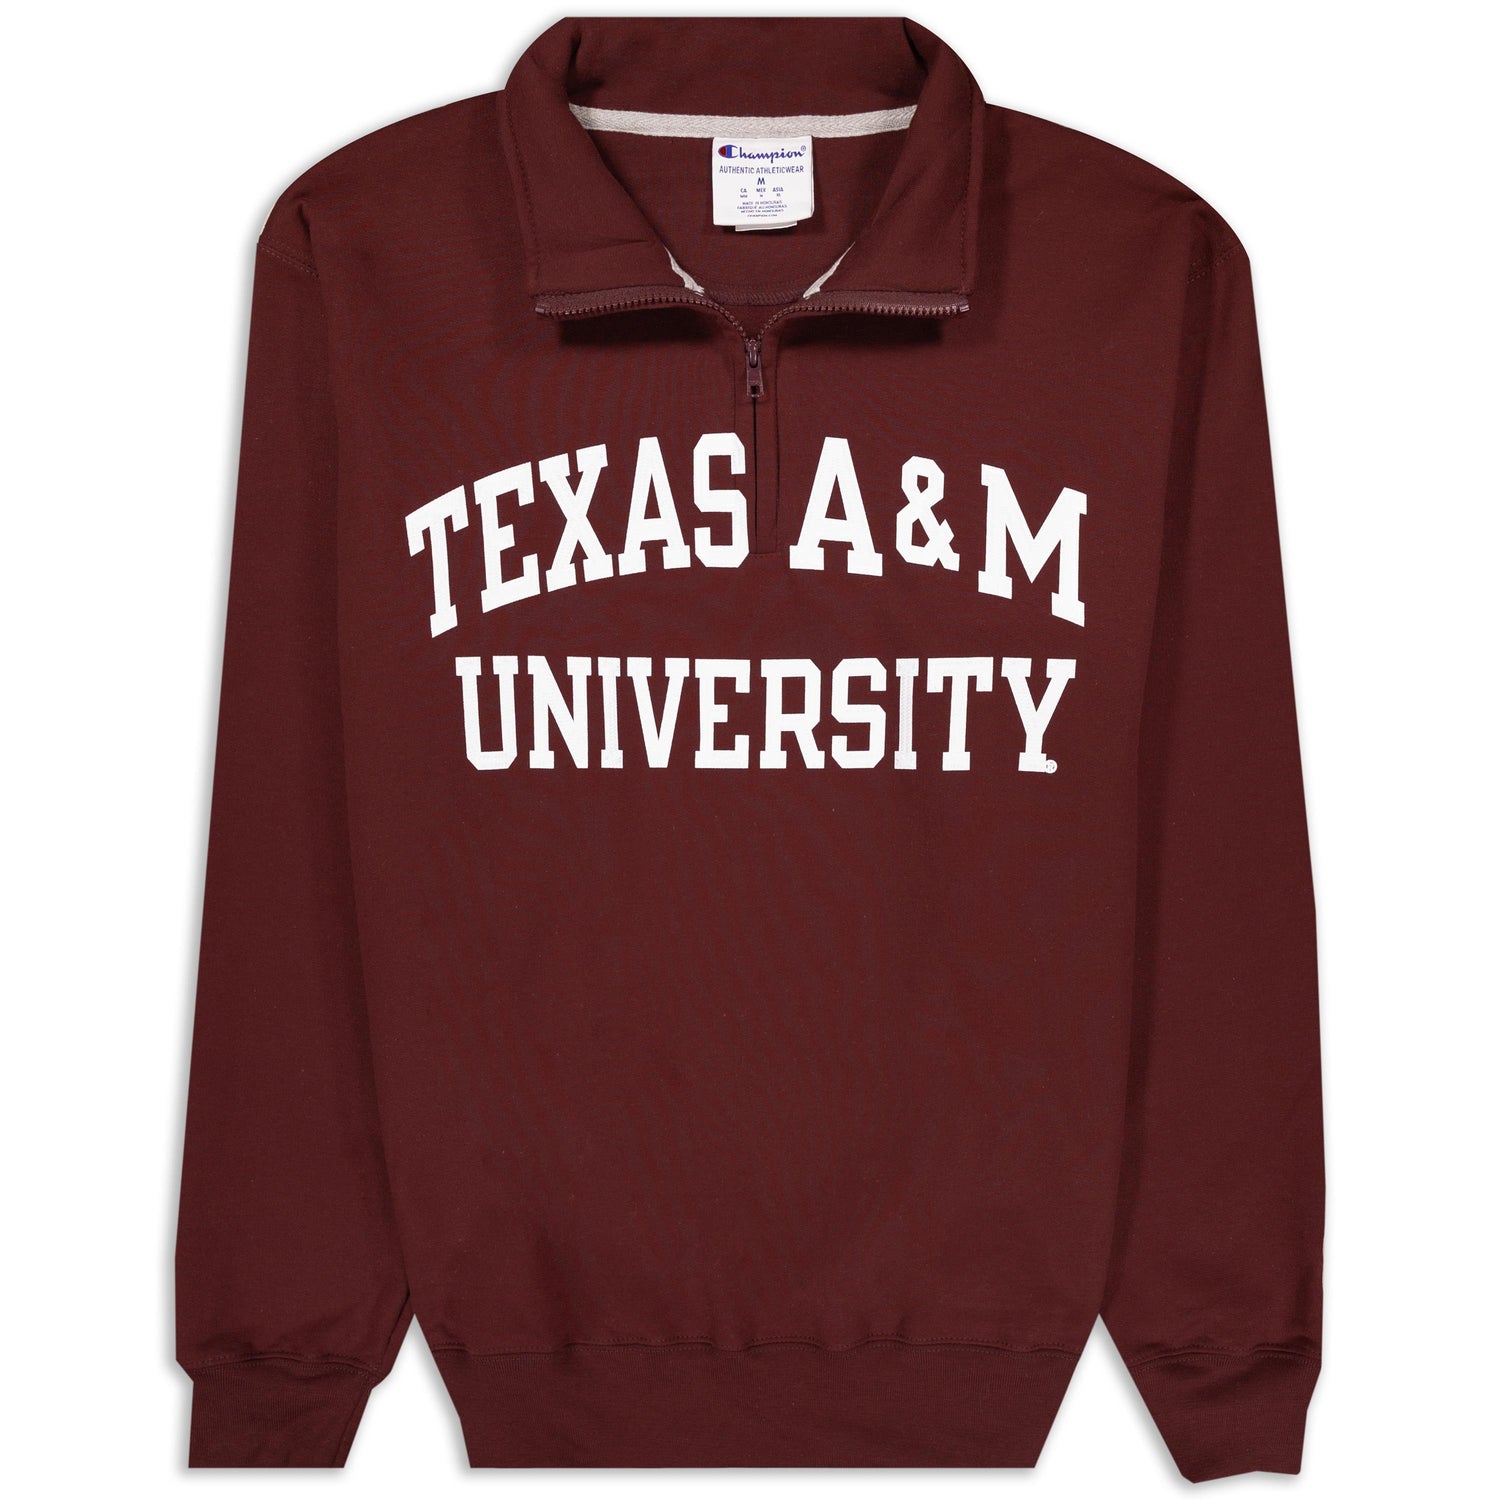 Texas A&M Champion Maroon Arched Powerblend Quarter Zip